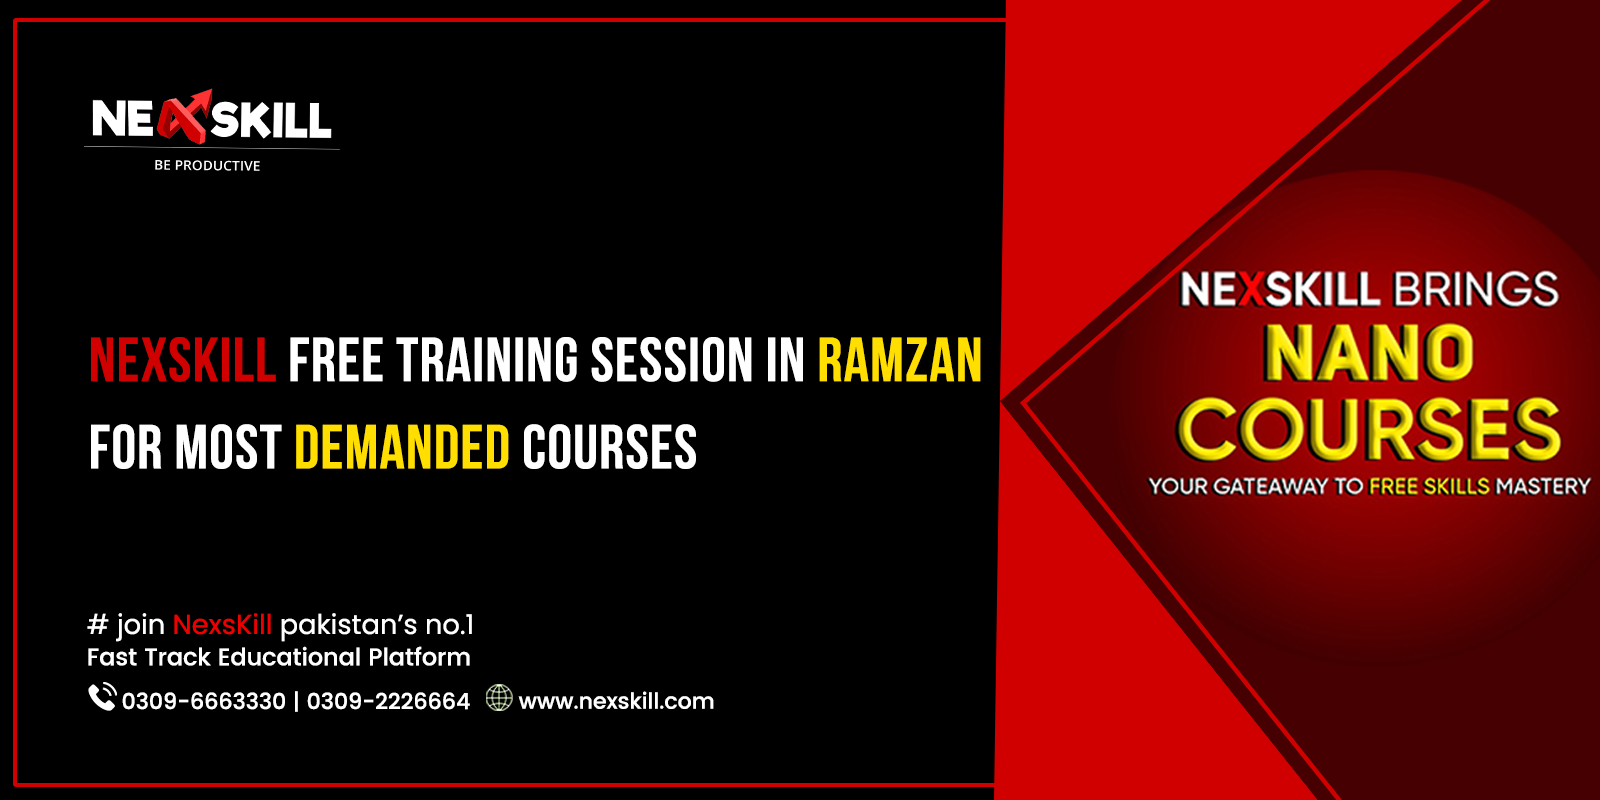 Nexskill Free Training Session in Ramzan for Most Demanded Courses